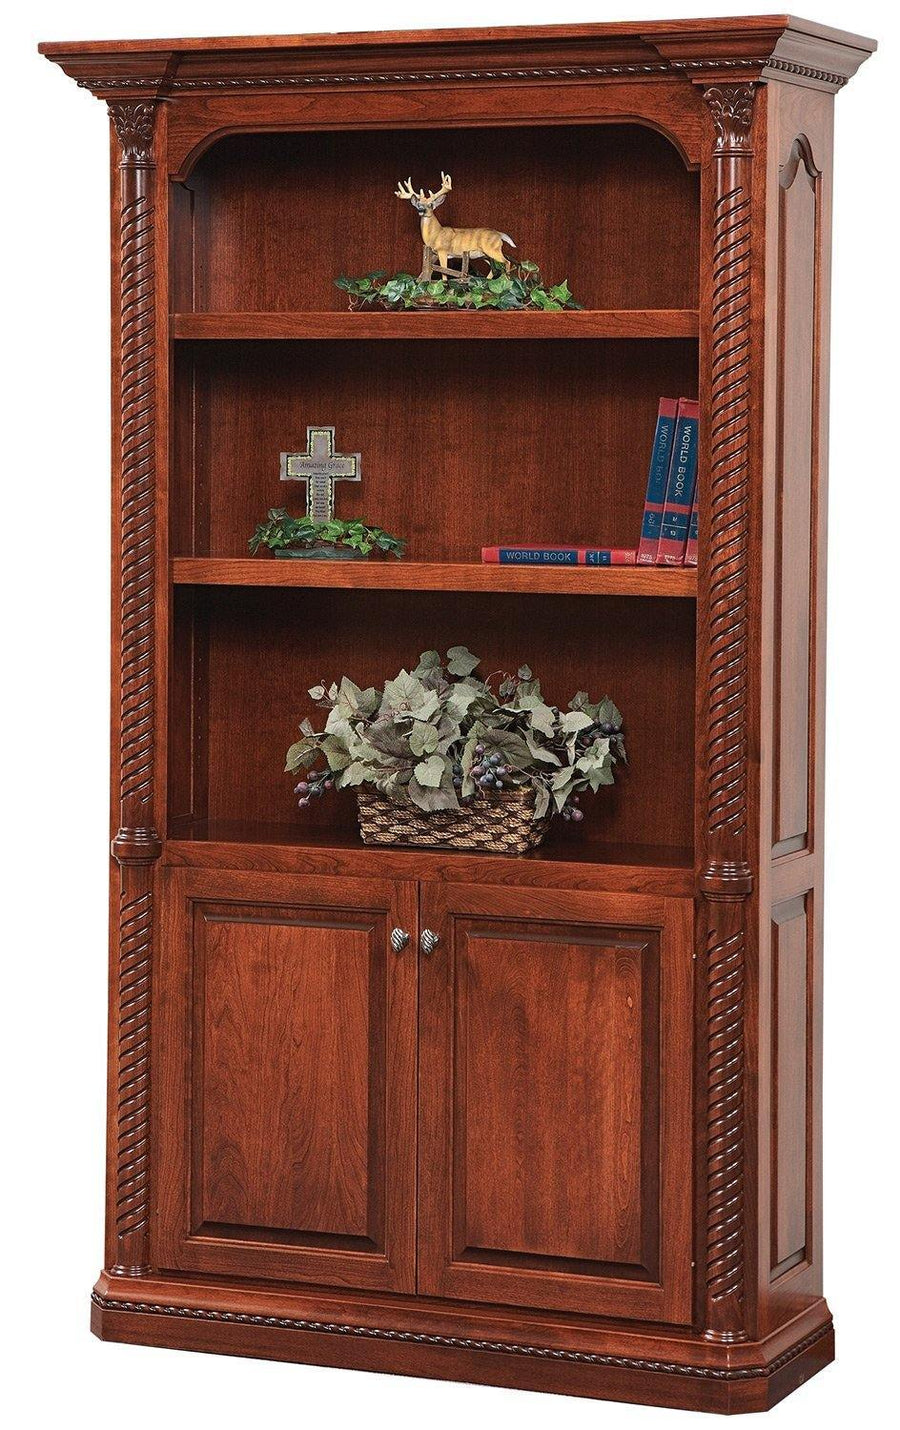 Lexington Amish Solid Wood Bookcase - Foothills Amish Furniture